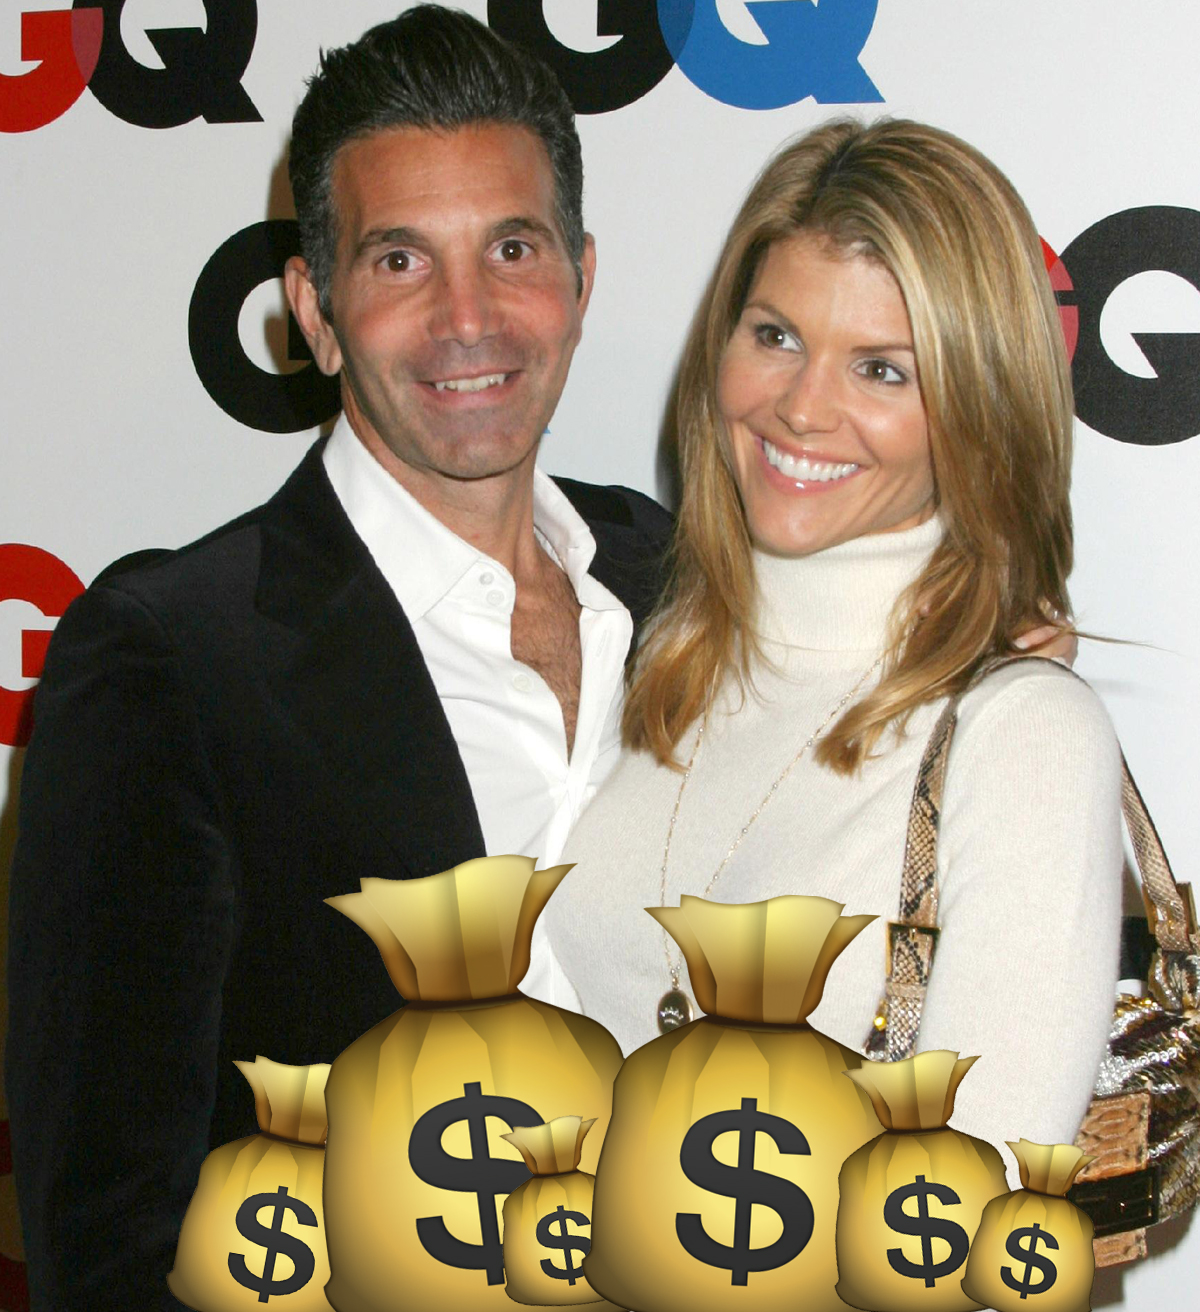 Lori Loughlin and Mossimo Giannulli are hoping to reduce their bail and bond amounts!